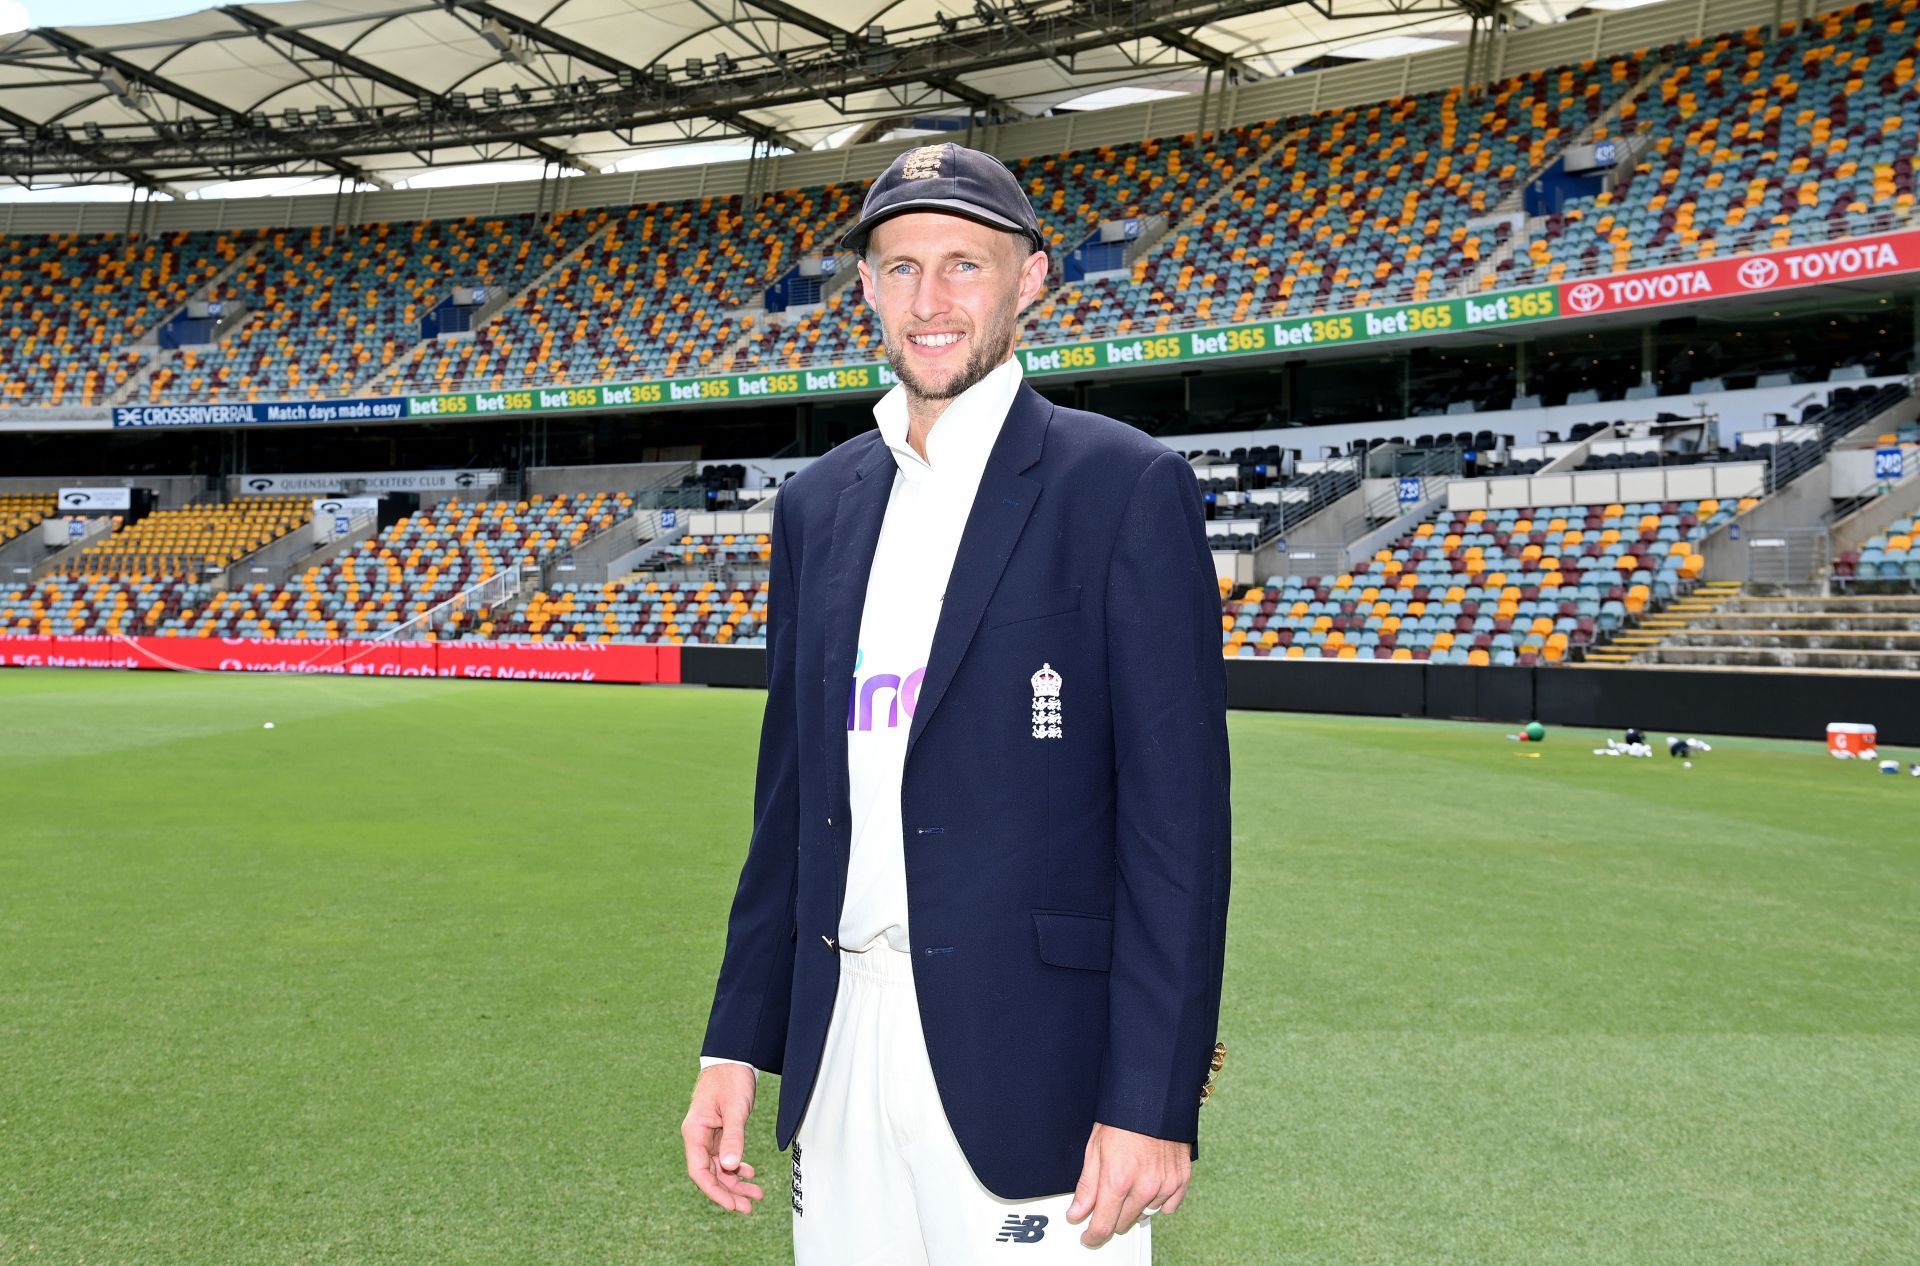 Joe Root will be leading England in Ashes 2021.